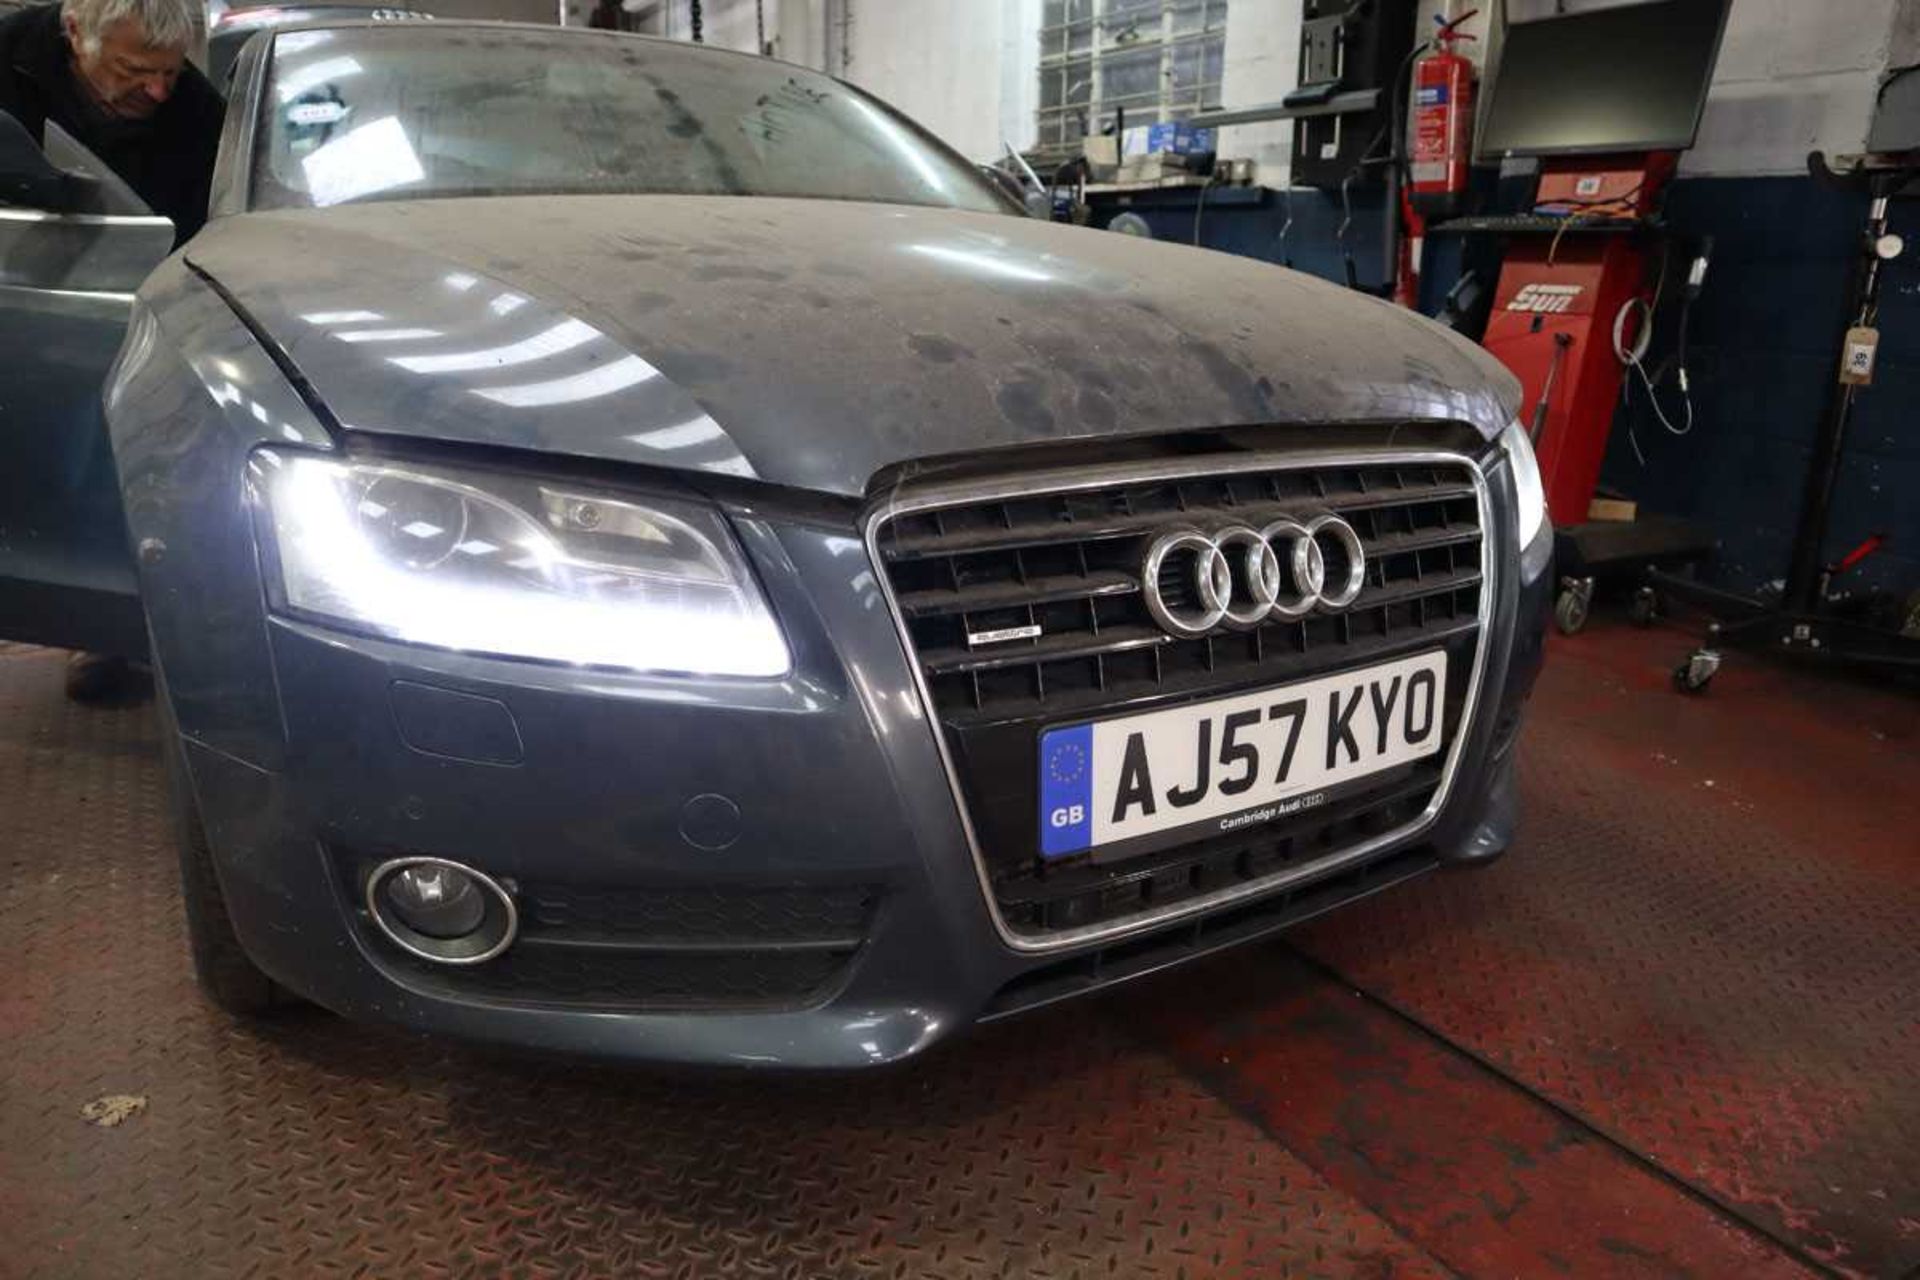 +VAT AJ57 KYO Audi A5 3L TDI Quatro 3 door coupe/saloon, with key and v5 registration document, - Image 10 of 10